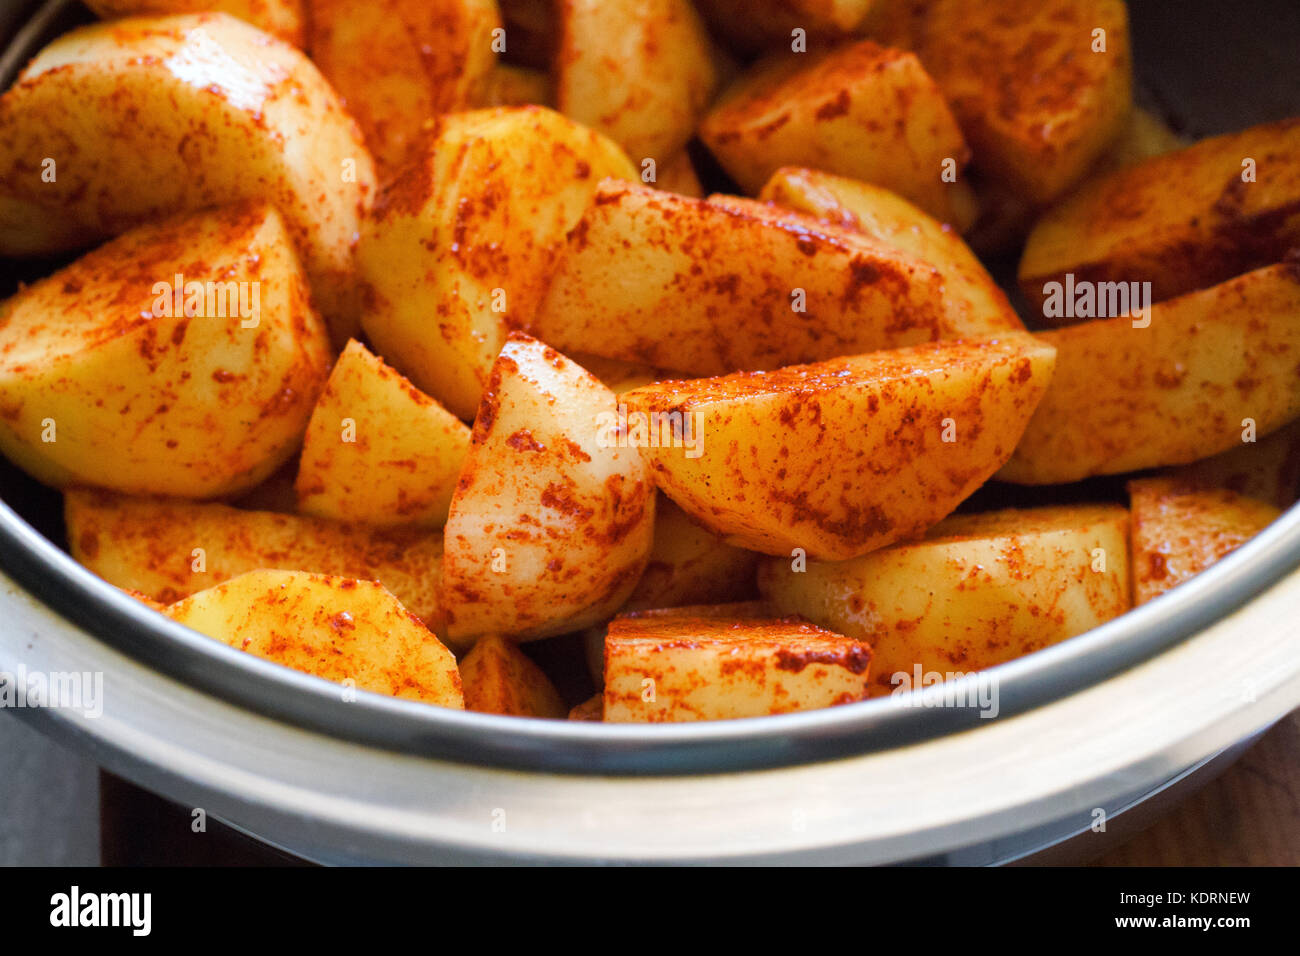 potato wedges with spices and thyme on a metal baking sheet. Top view Stock Photo